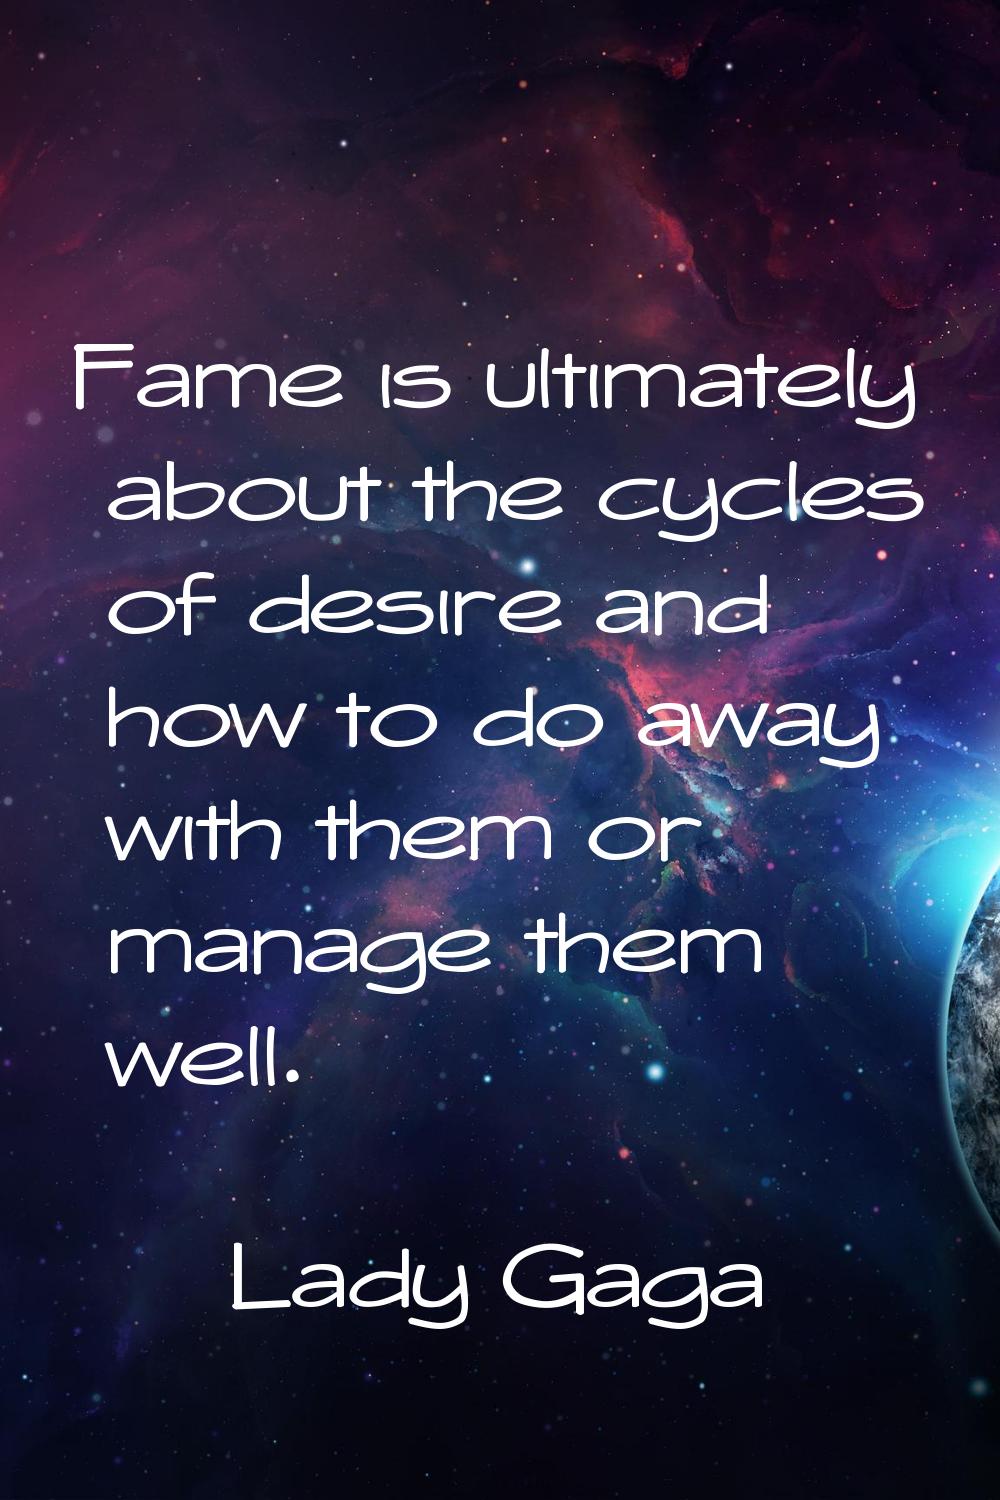 Fame is ultimately about the cycles of desire and how to do away with them or manage them well.